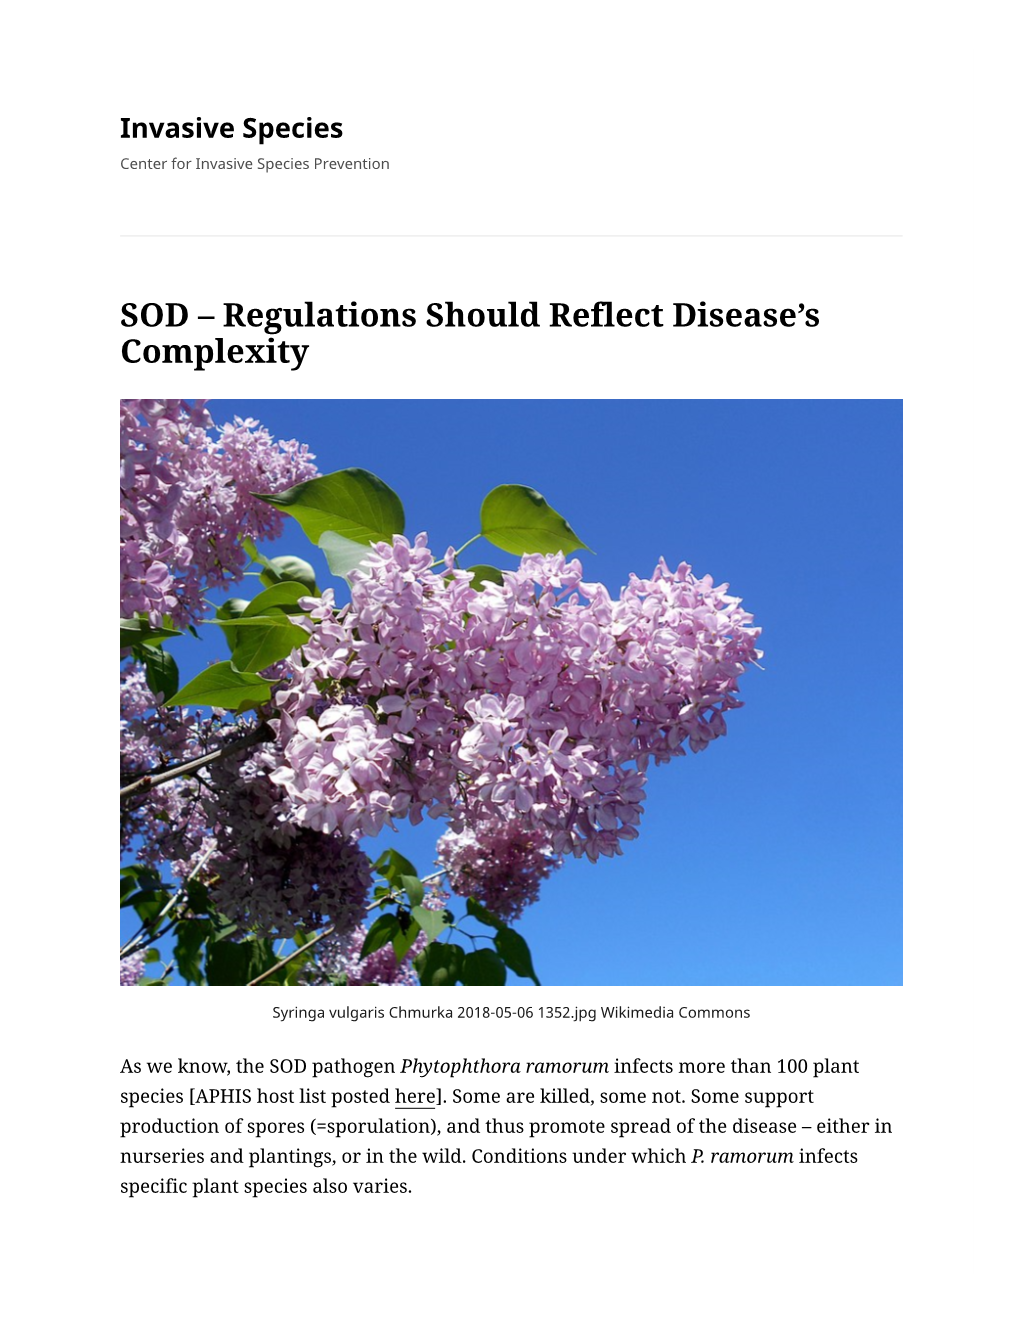 SOD – Regulations Should Reflect Disease's Complexity